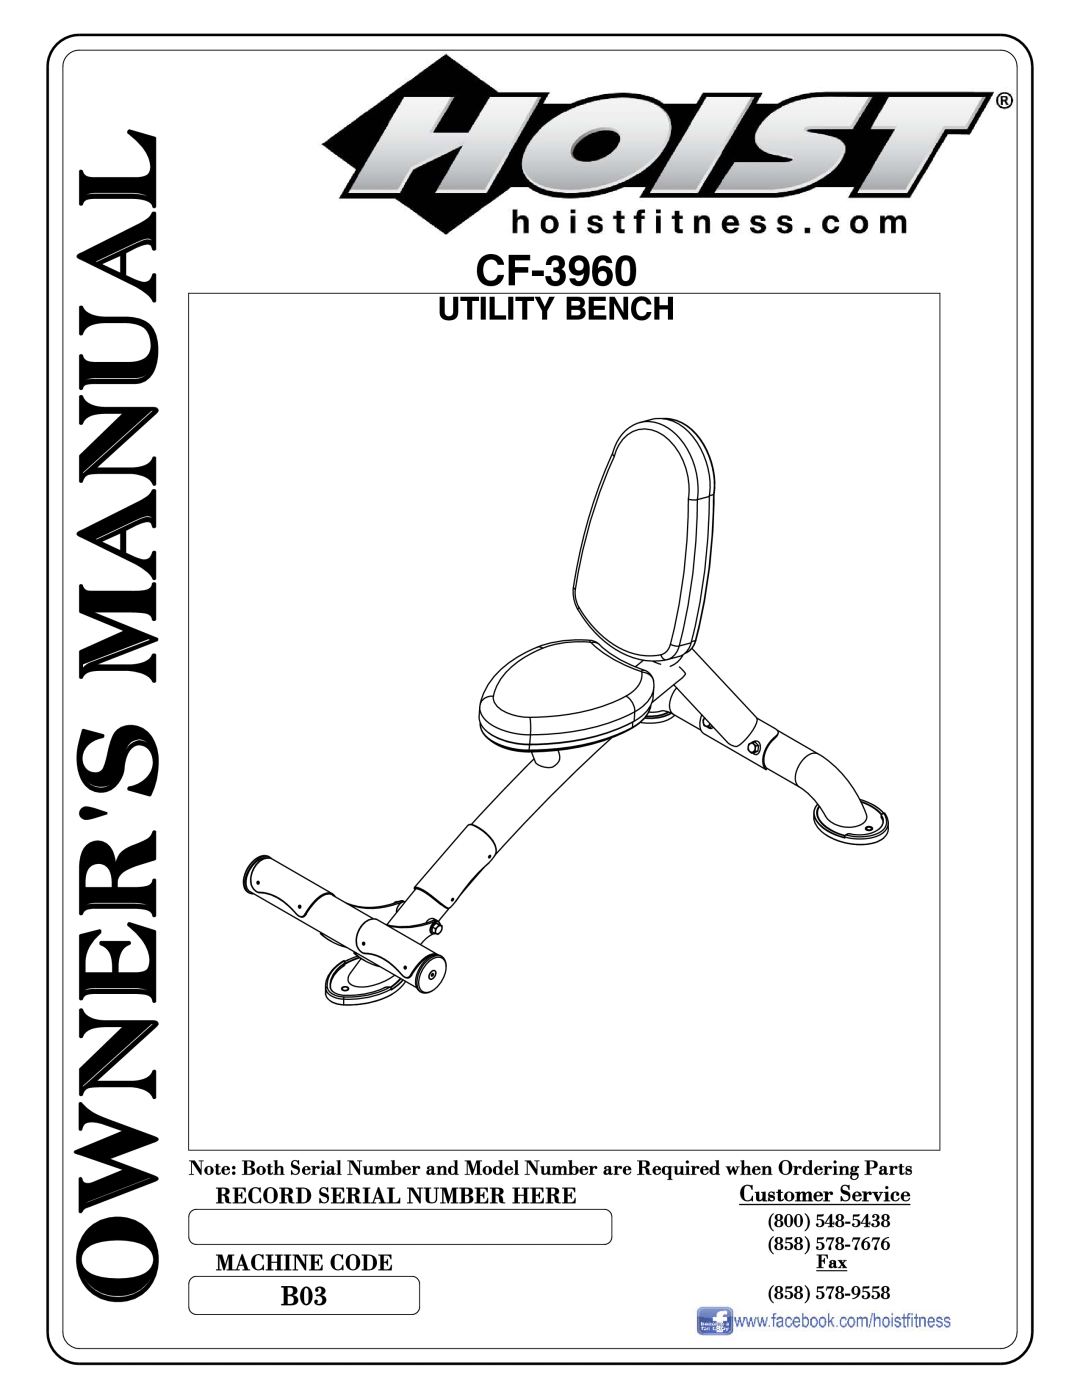 Hoist Fitness CF-3960 owner manual Utility Bench, Record Serial Number Here, Machine Code, Customer Service 